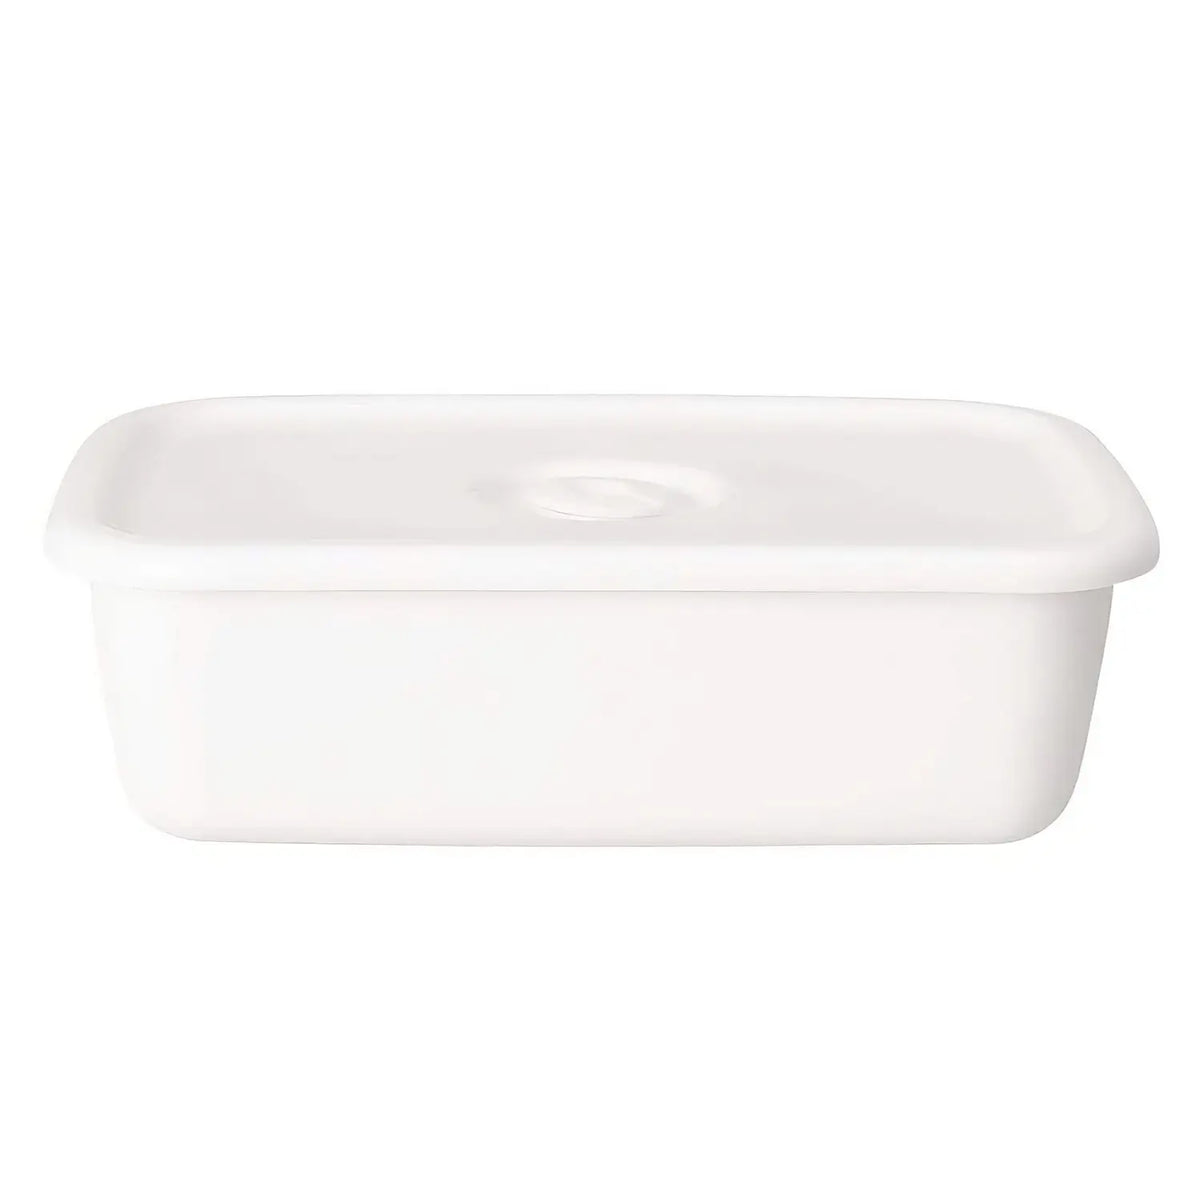 Noda Horo White Series Enamel Rectangle Deep Food Containers with Sealed Lid